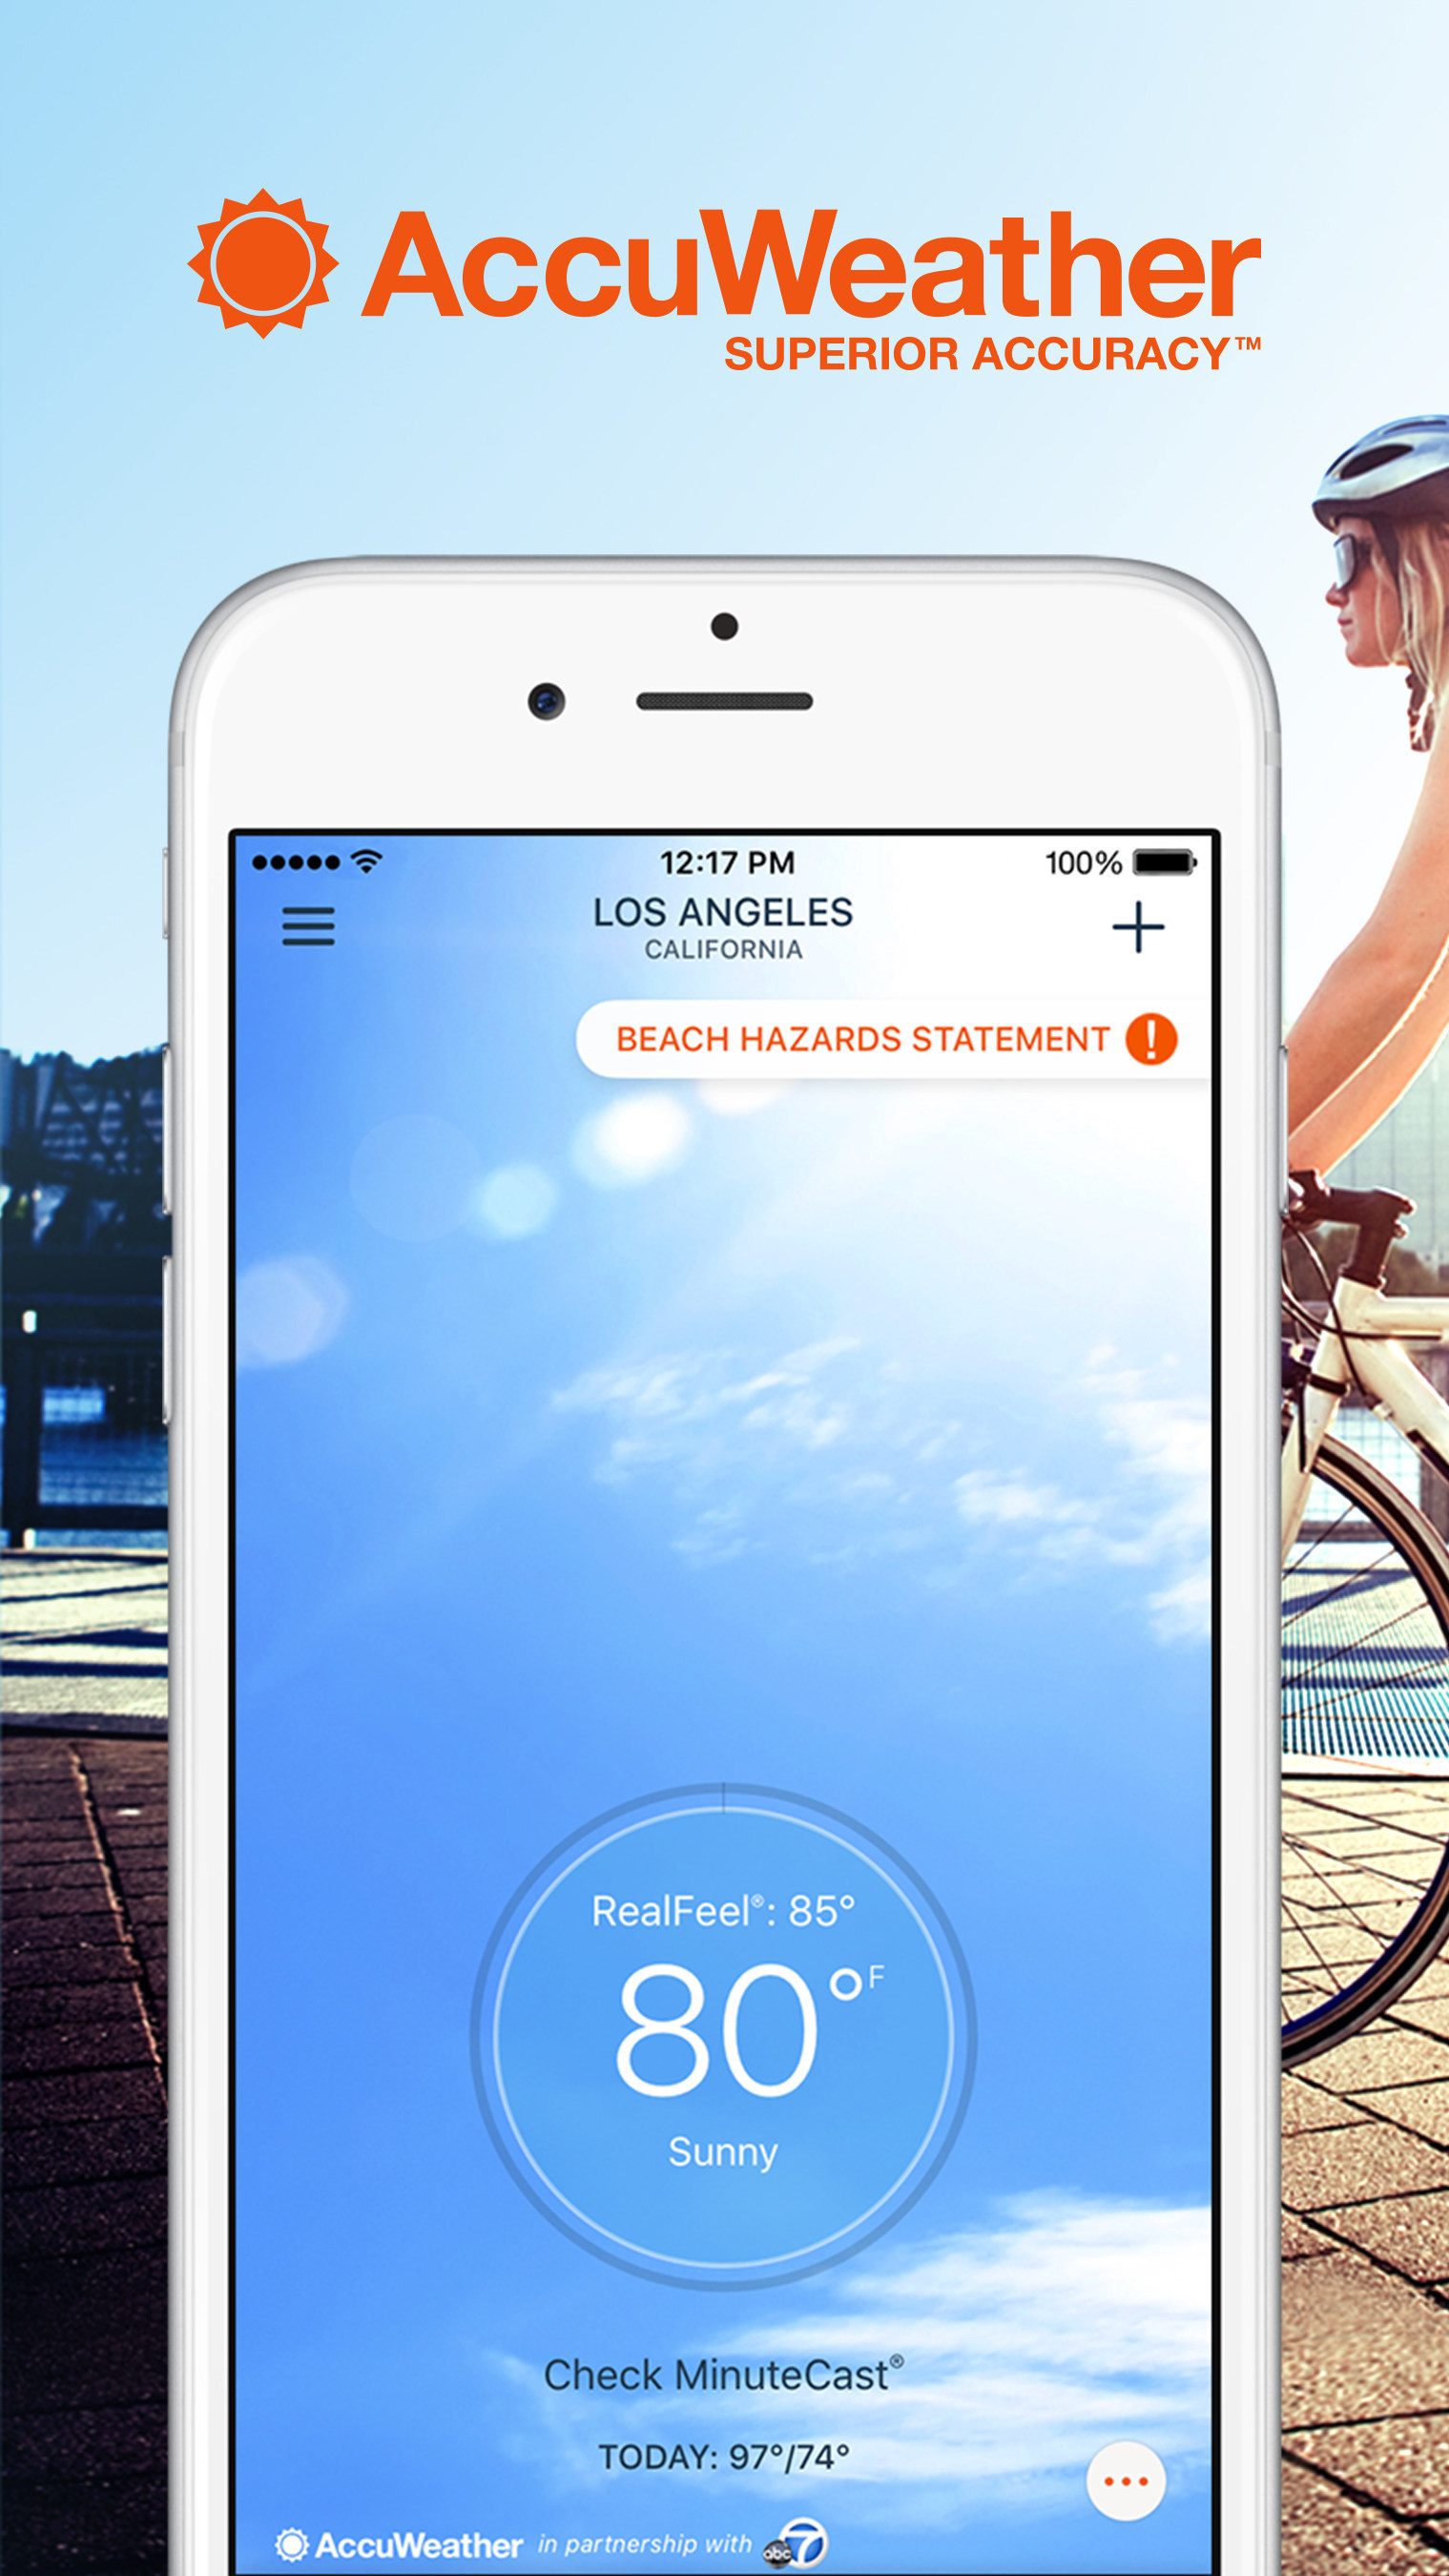 AccuWeather Launches New App for iPhone, iPad & iPod touch with Significant  Enhancements Supporting iOS 9, Providing Best-in-Class Weather Experience